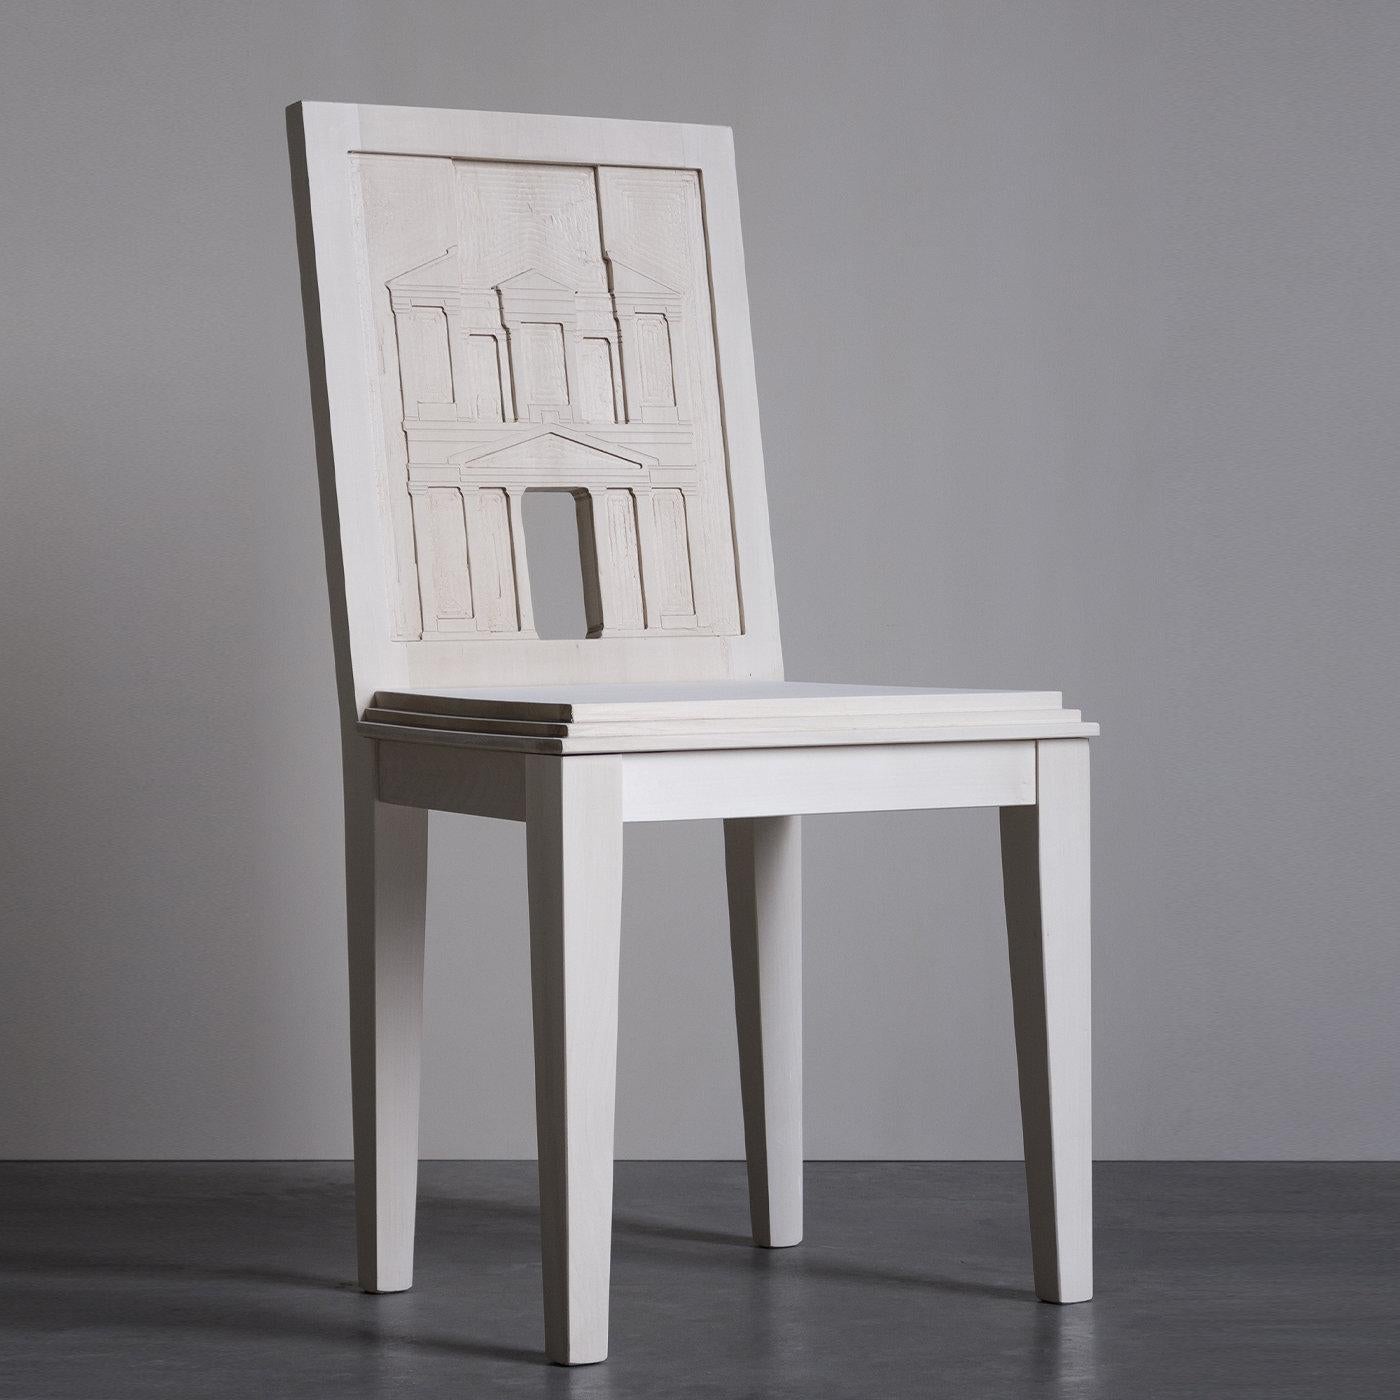 Inspired by the historical and archaeological city of southern Jordan Petra, this chair is distinguished by a magnificent hand-carved backrest that reproduces one of the city's sepulchers, originally carved in stone. Masterfully crafted of solid